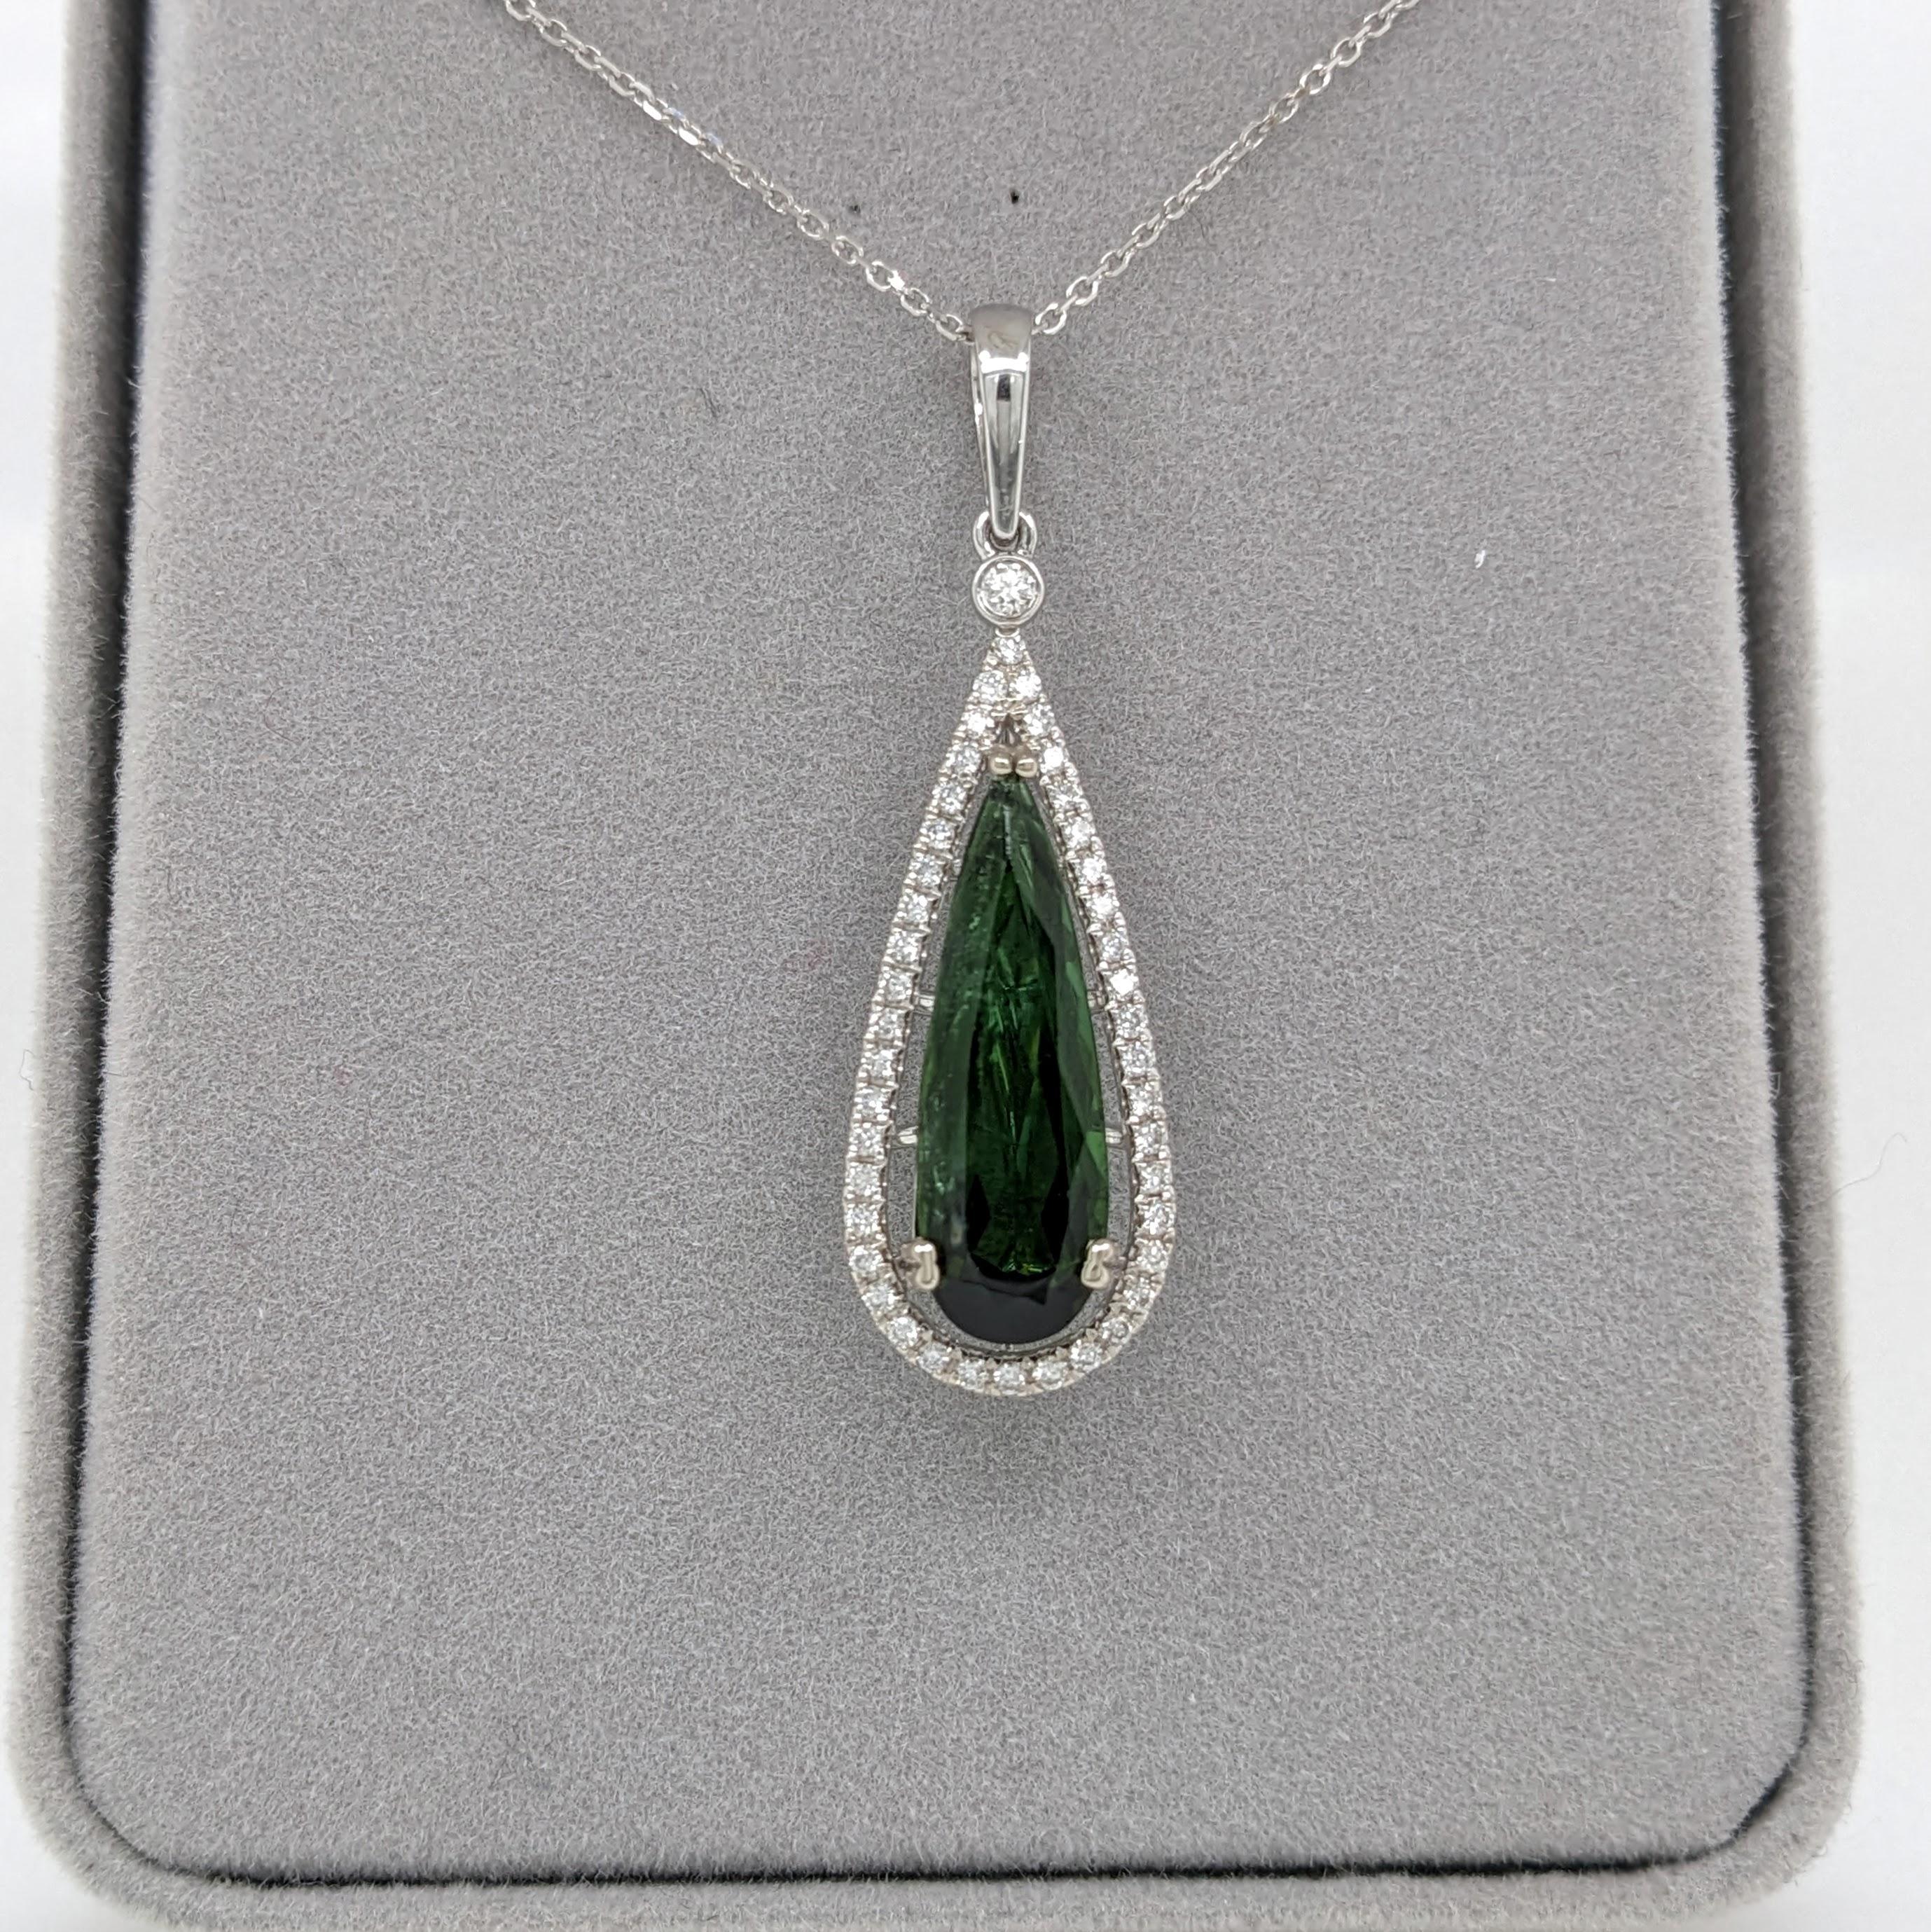 Pear Cut 3.4ct Tourmaline Pendant w Earth Mined Diamonds in Solid 14K Gold Pear 20x6mm For Sale